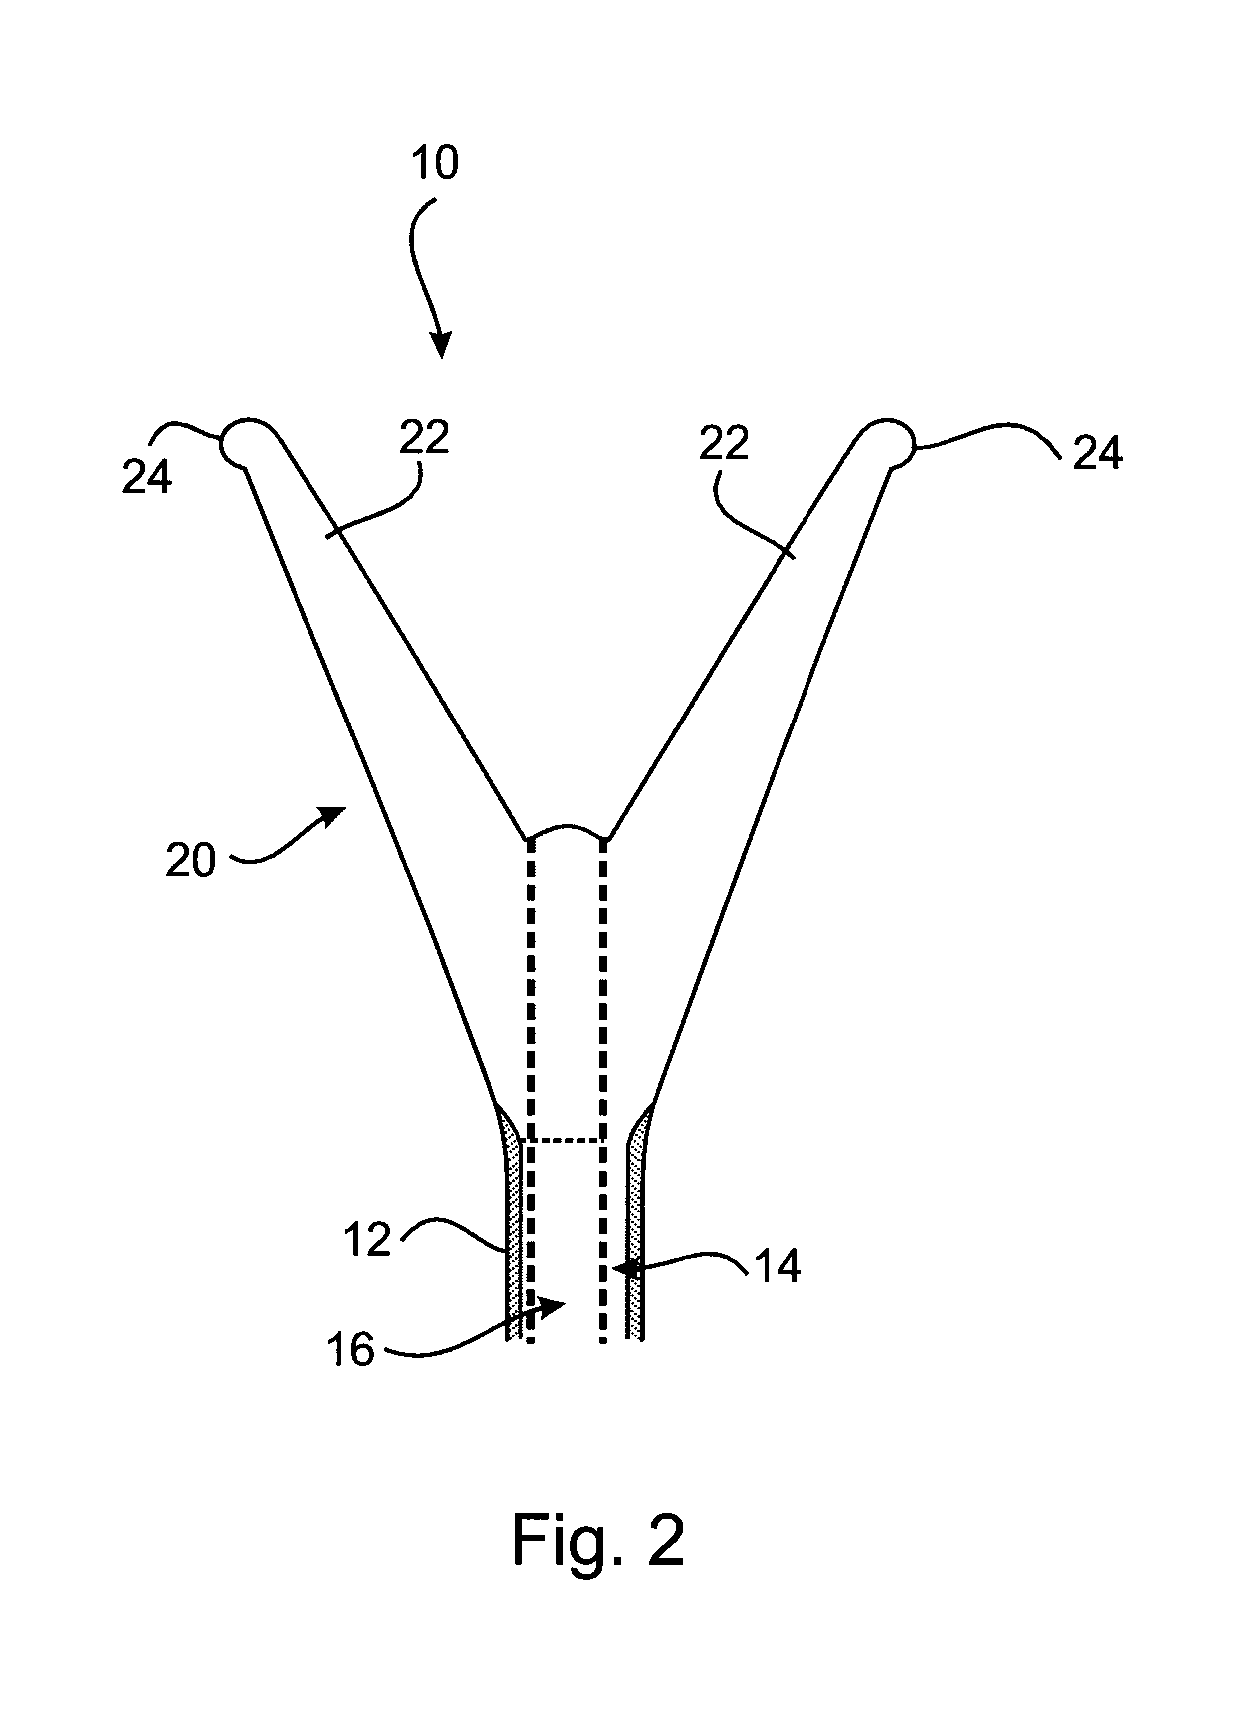 Therapeutic substance transfer catheter and method